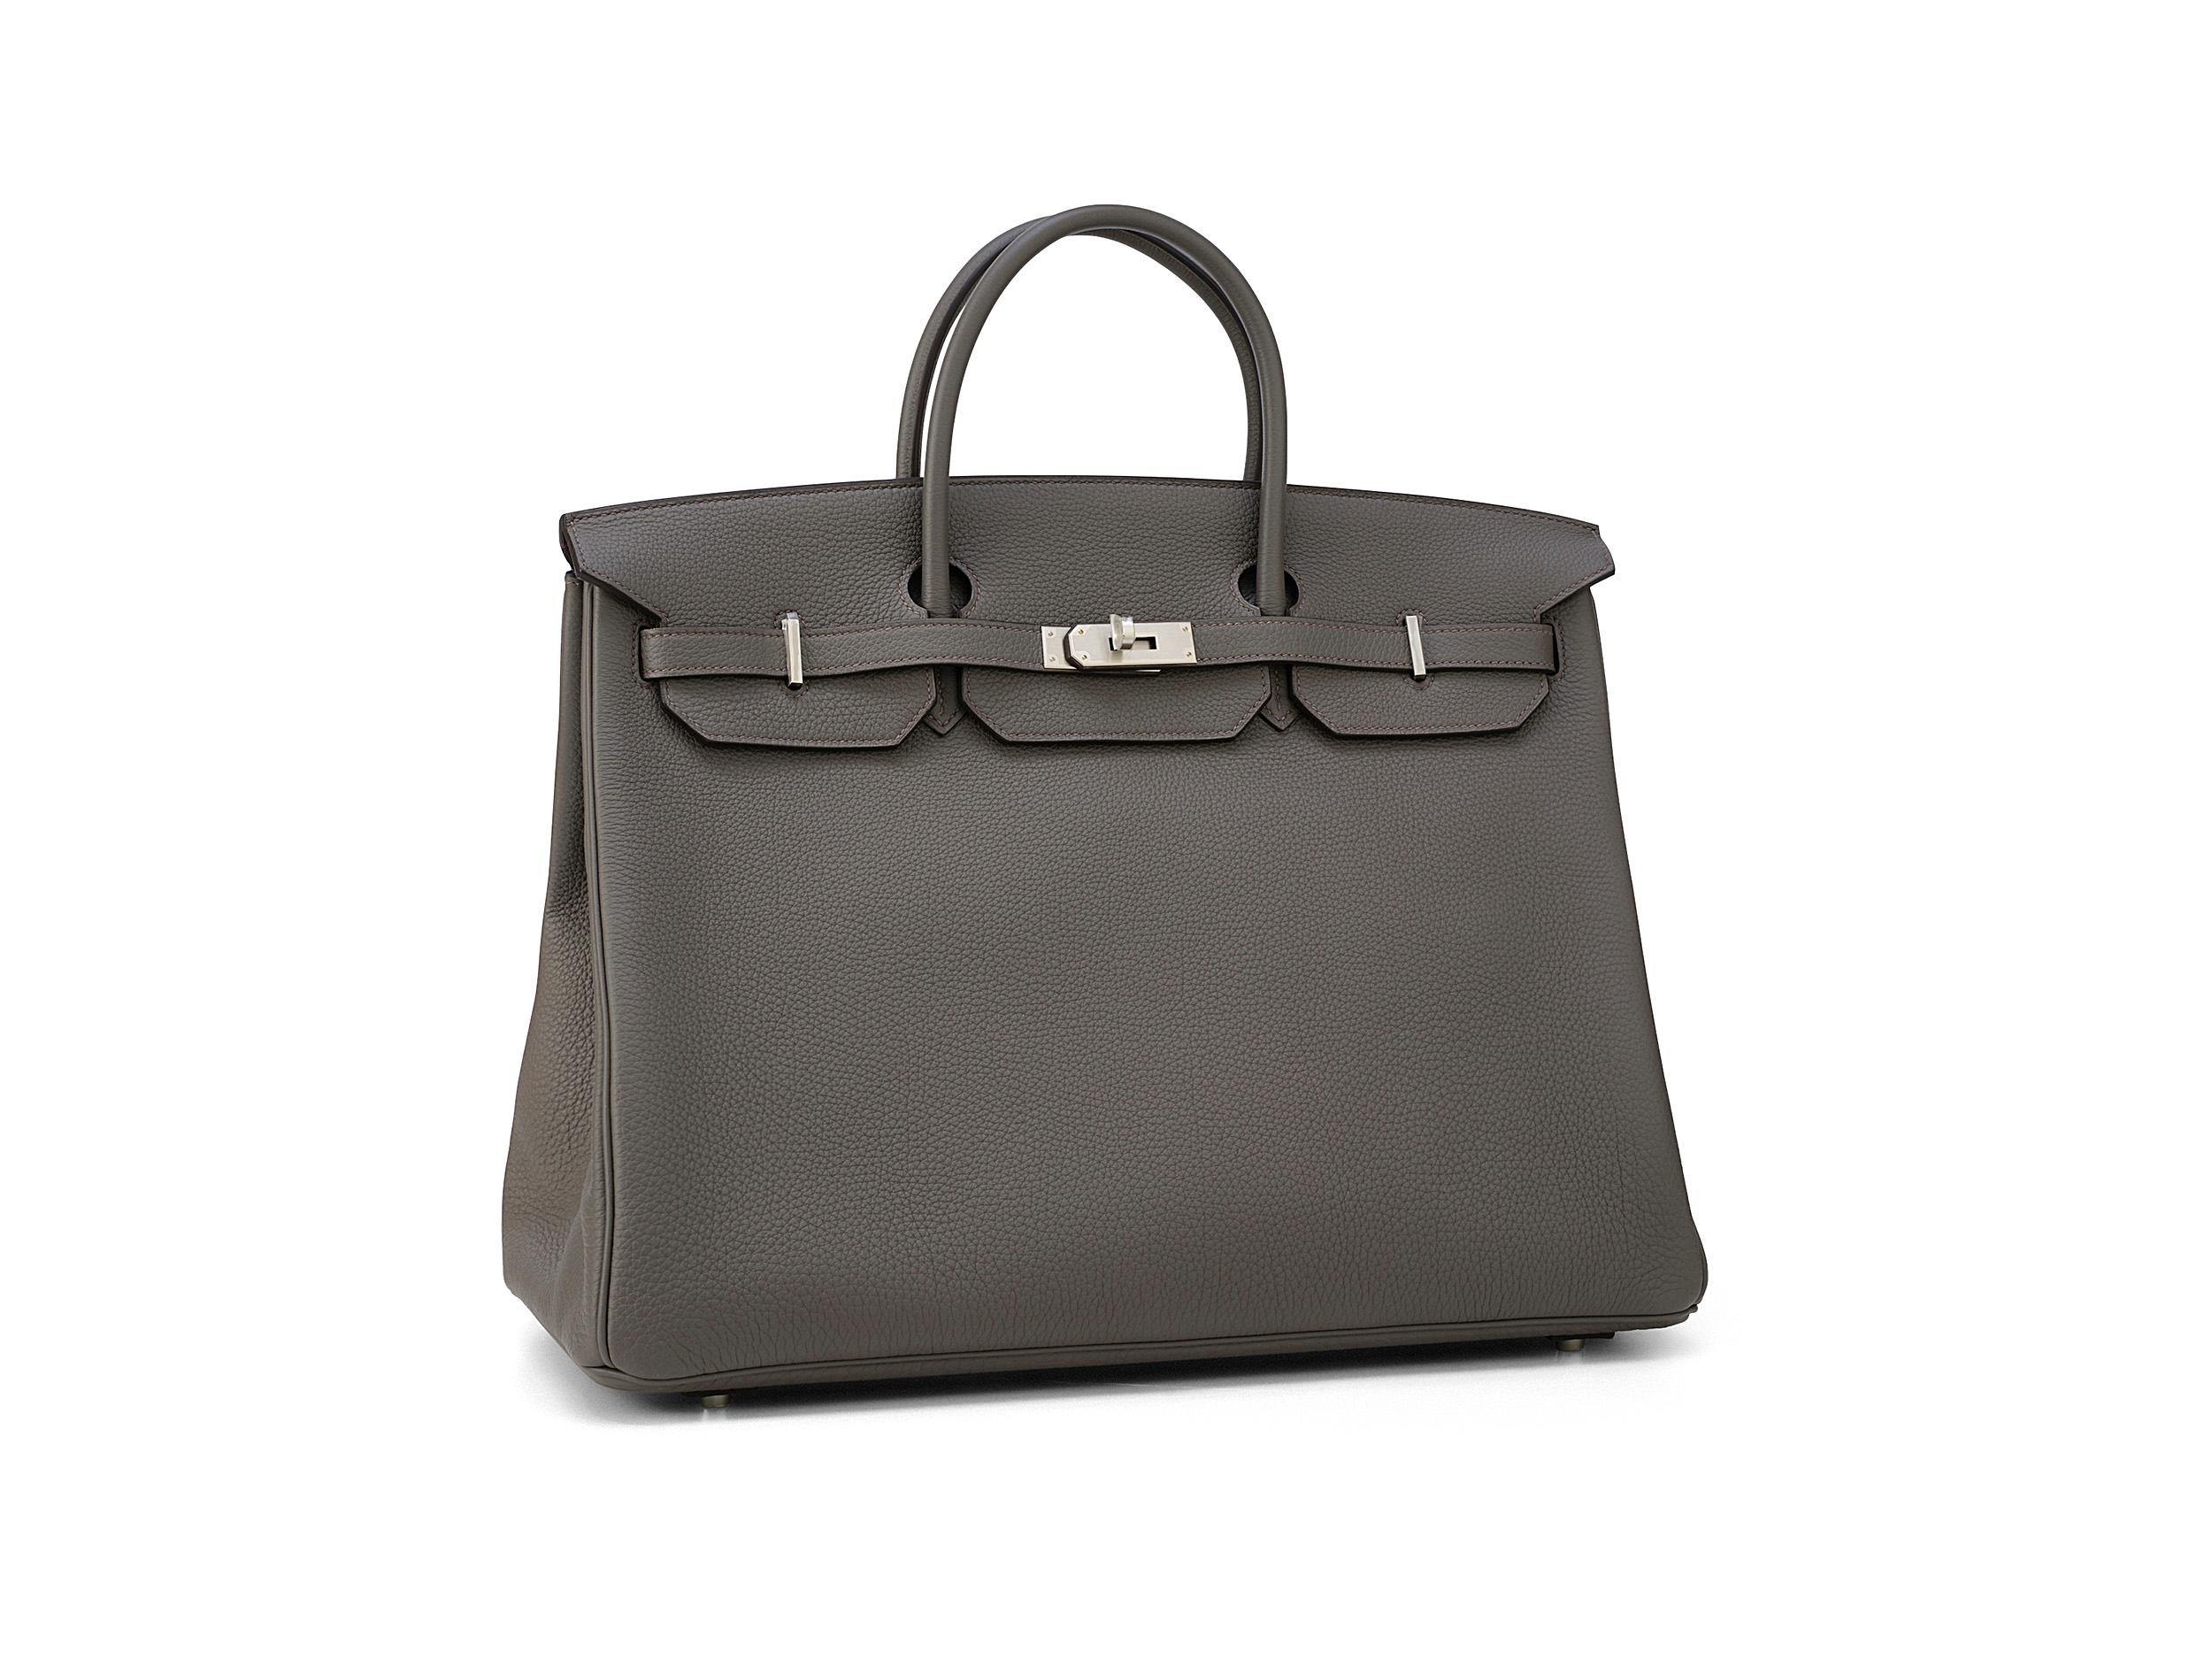 Hermès Birkin HSS 40 in gris etain/anemone and togo leather with palladium hardware. The bag is unworn but has small spots on the inside as pictured and comes as full set.

Bags with a horse shoe stamp (HSS) are customized for special